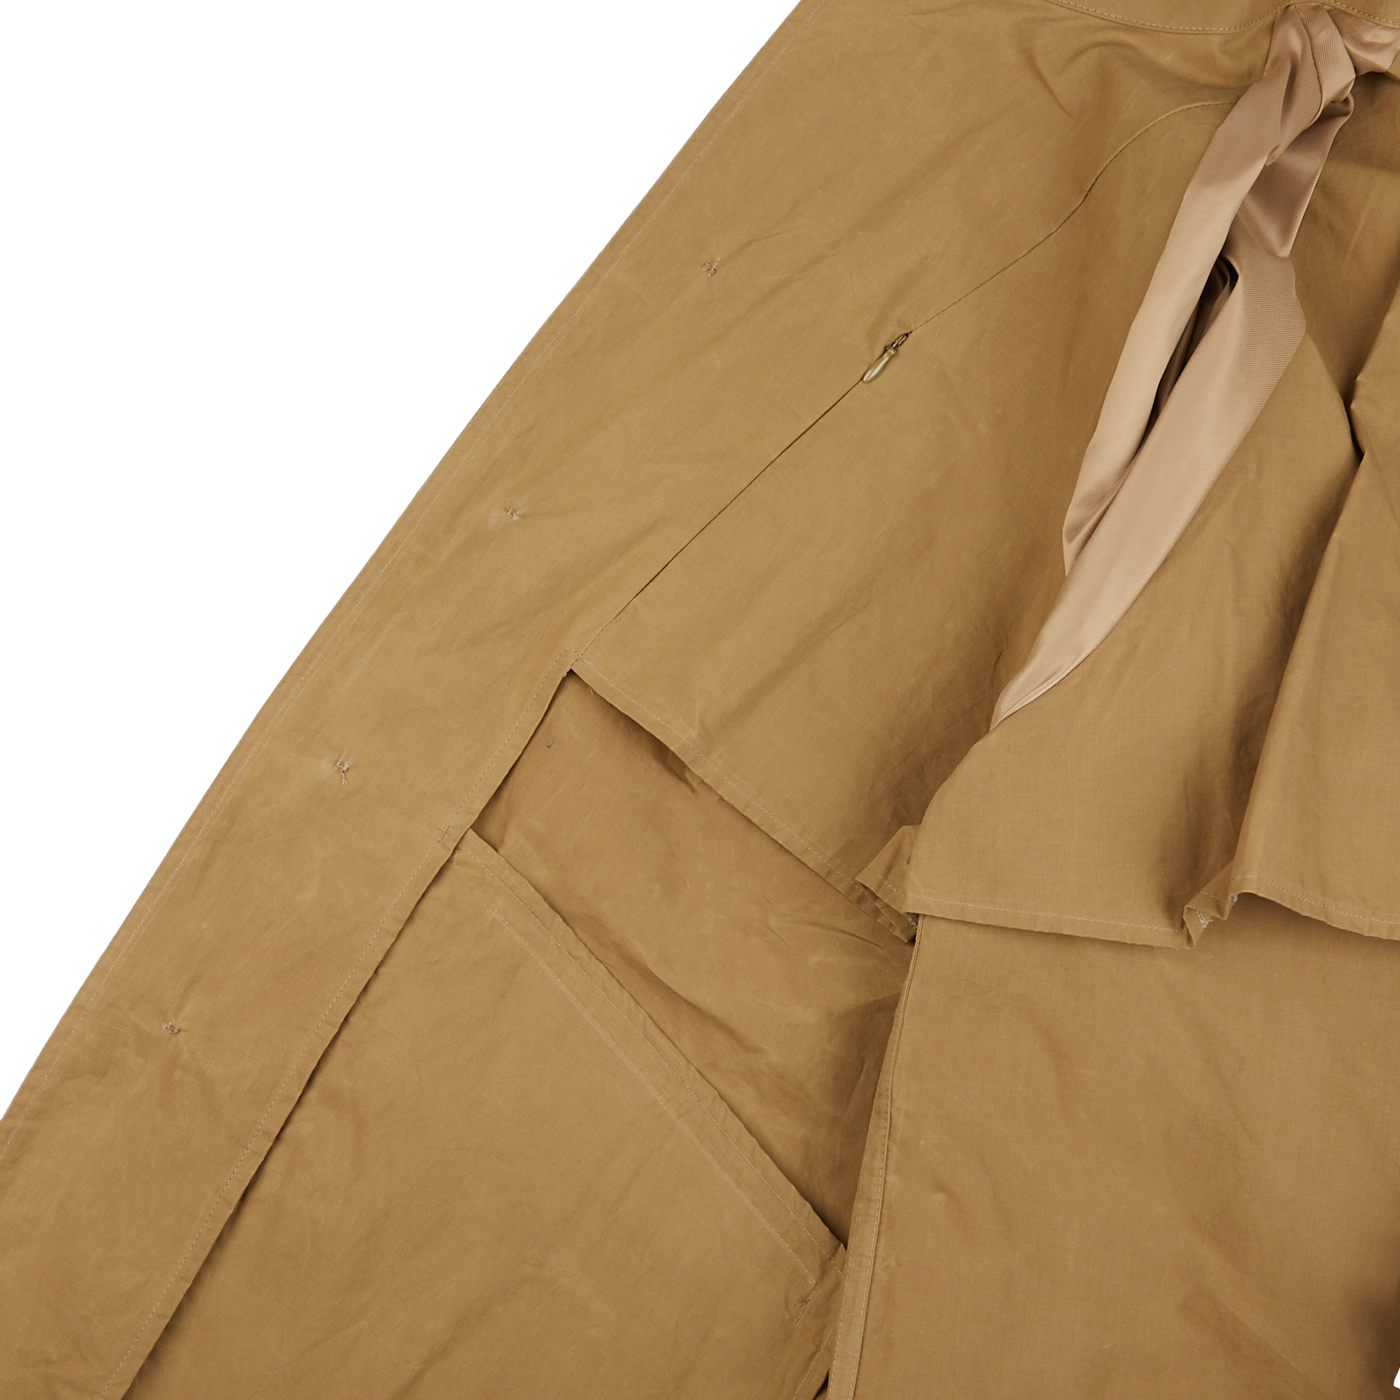 An image of a Dark Beige Waxed Cotton Kamikaze Trenchcoat by L'Impermeabile on a white surface.